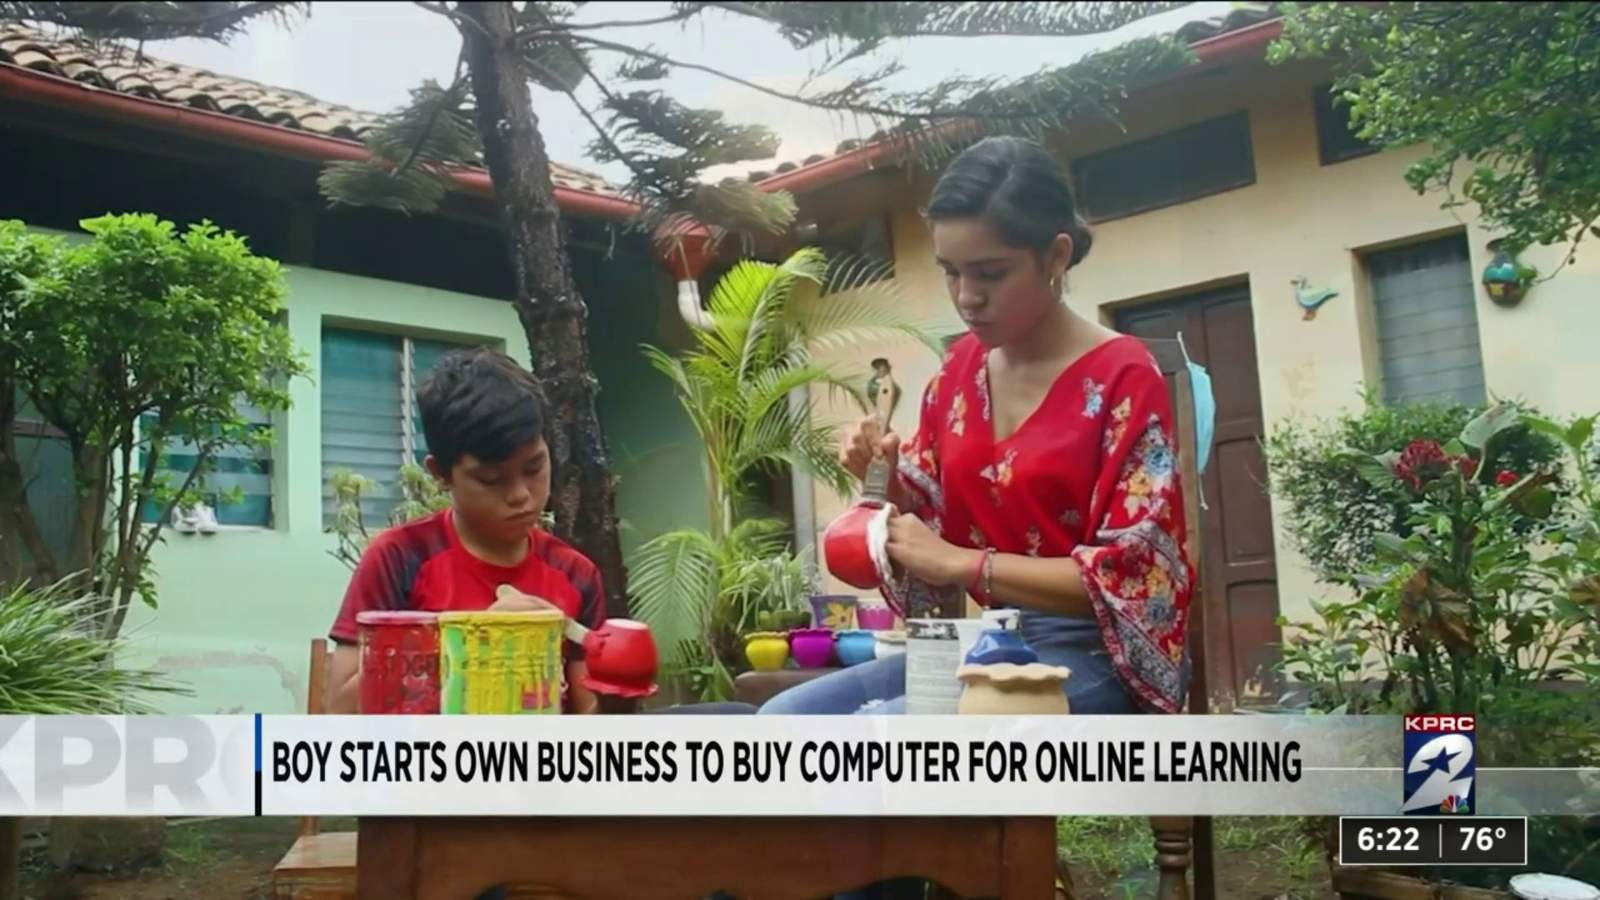 One Good Thing: Boy starts his own business to buy computer for online learning